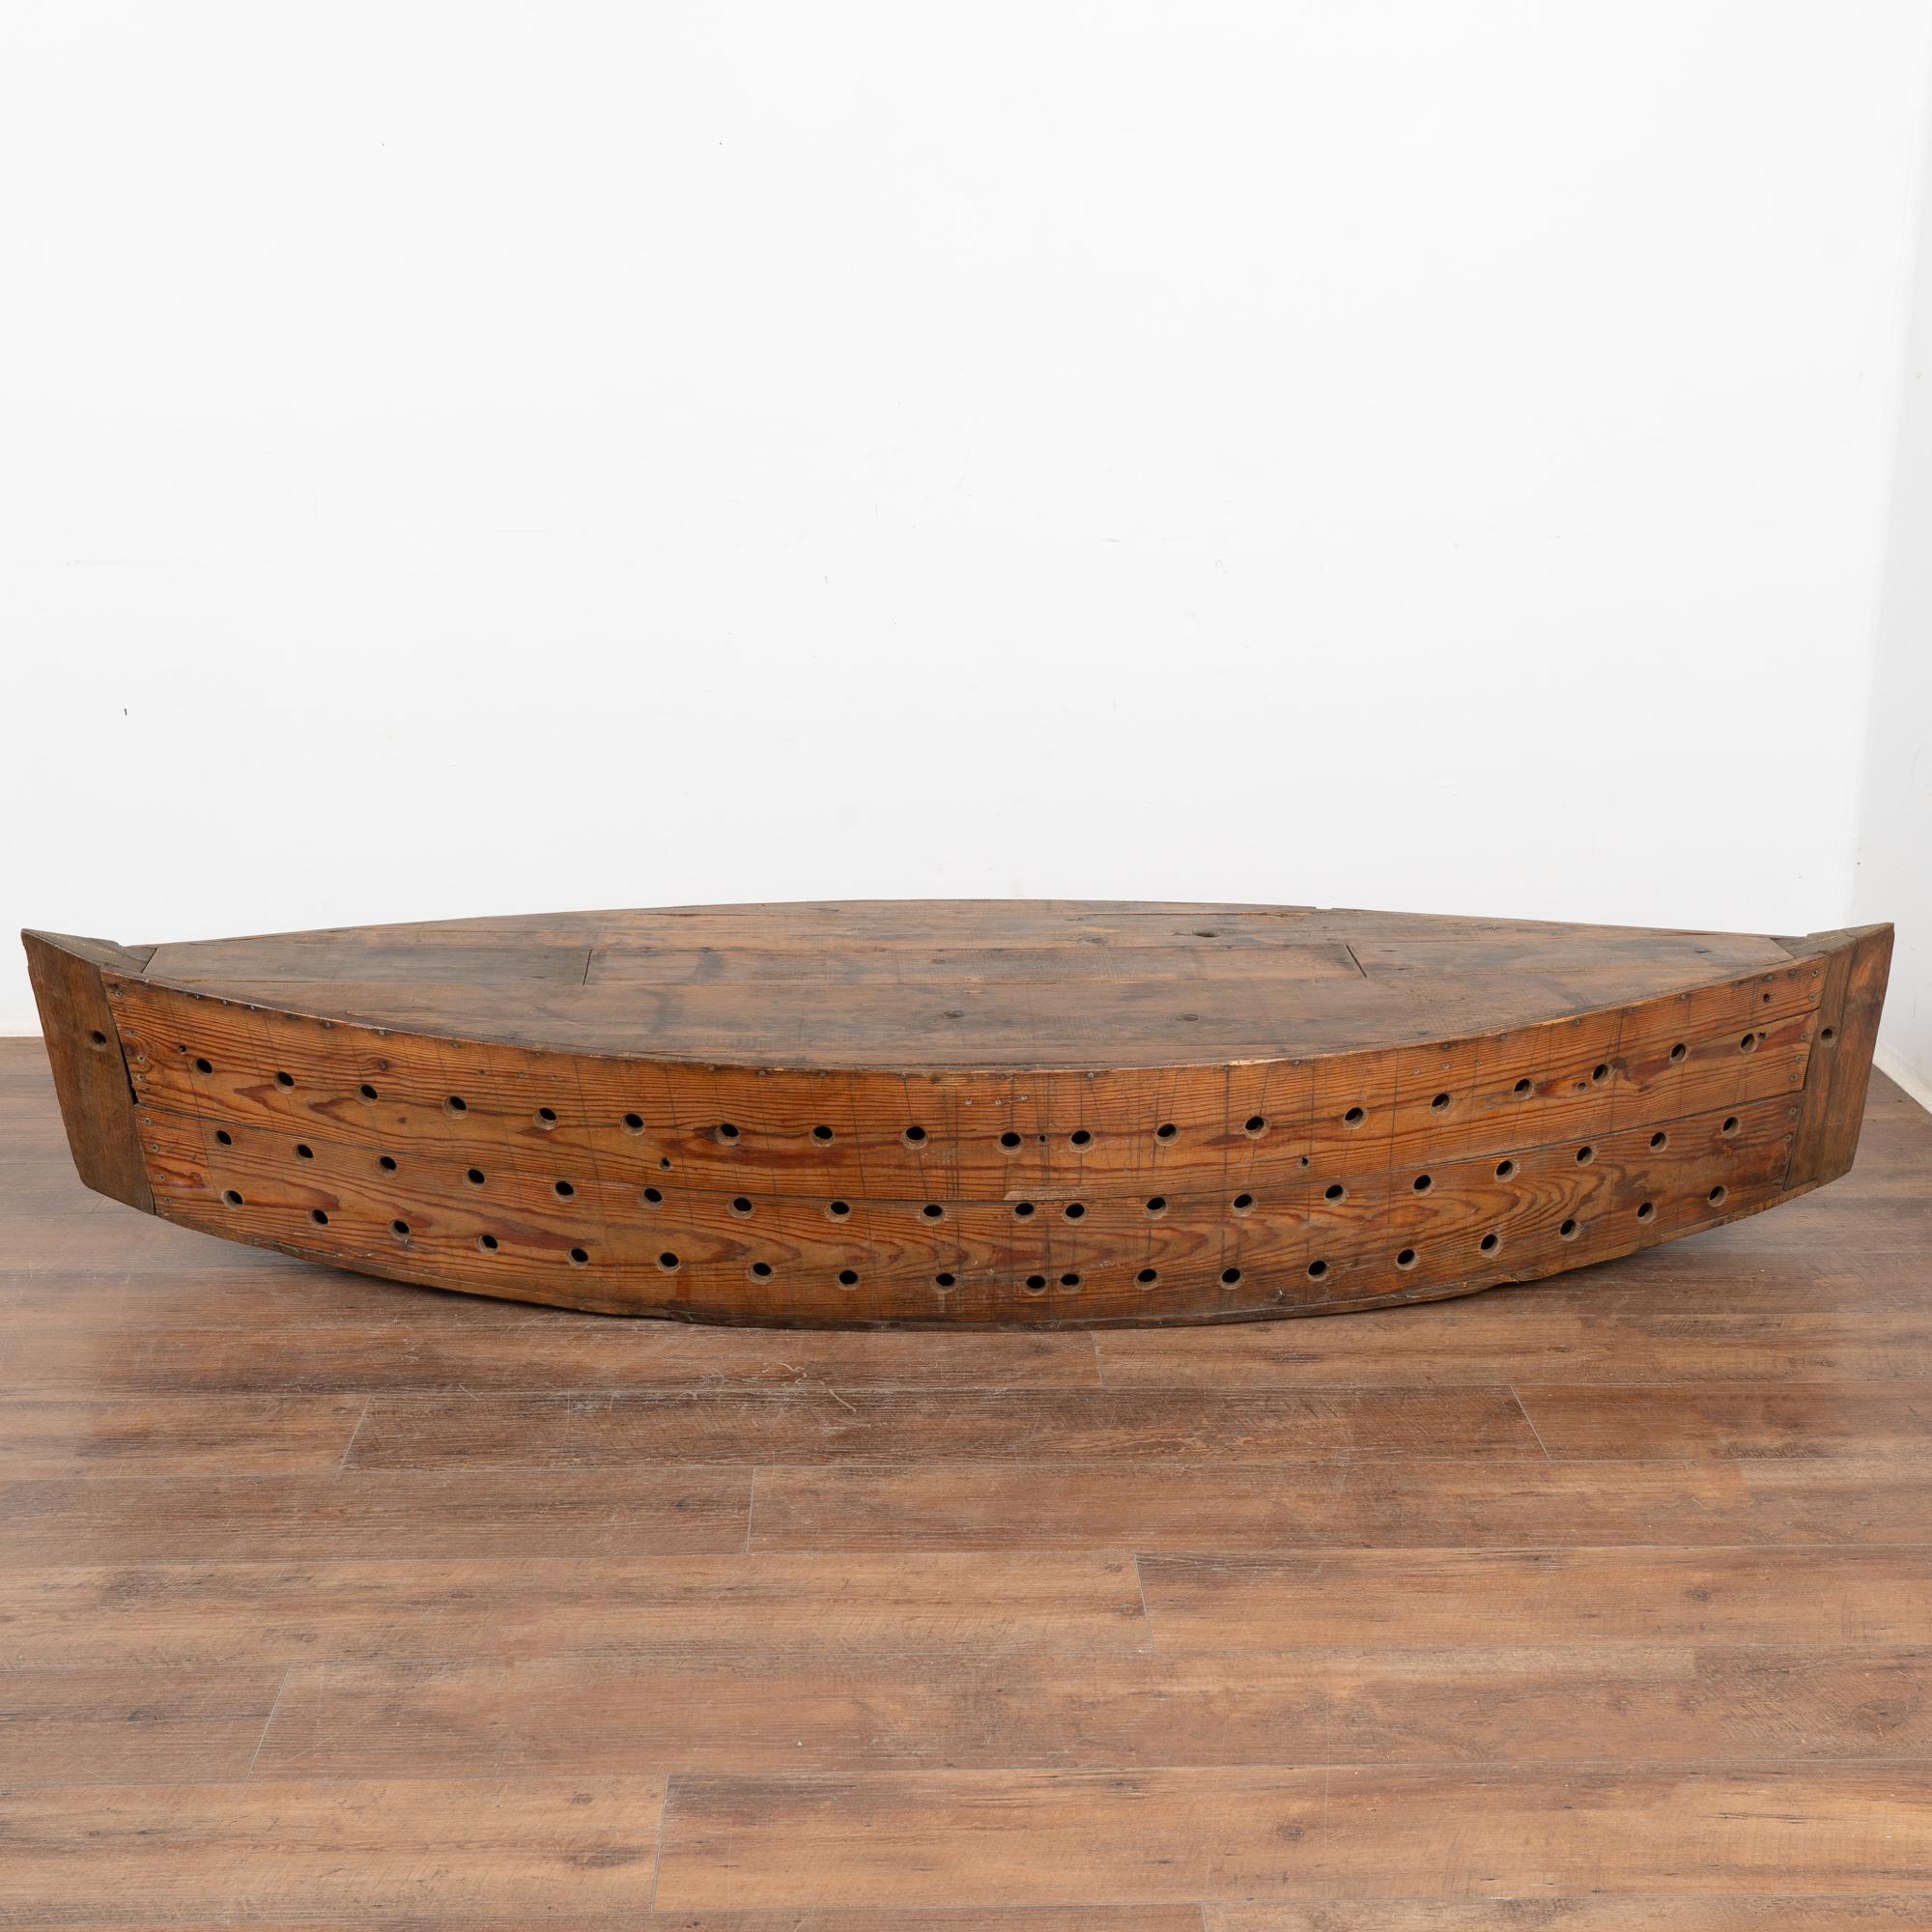 Hungarian Rustic Decorative Model Boat With Holes For Fishing or Large Creel, circa 1940 For Sale